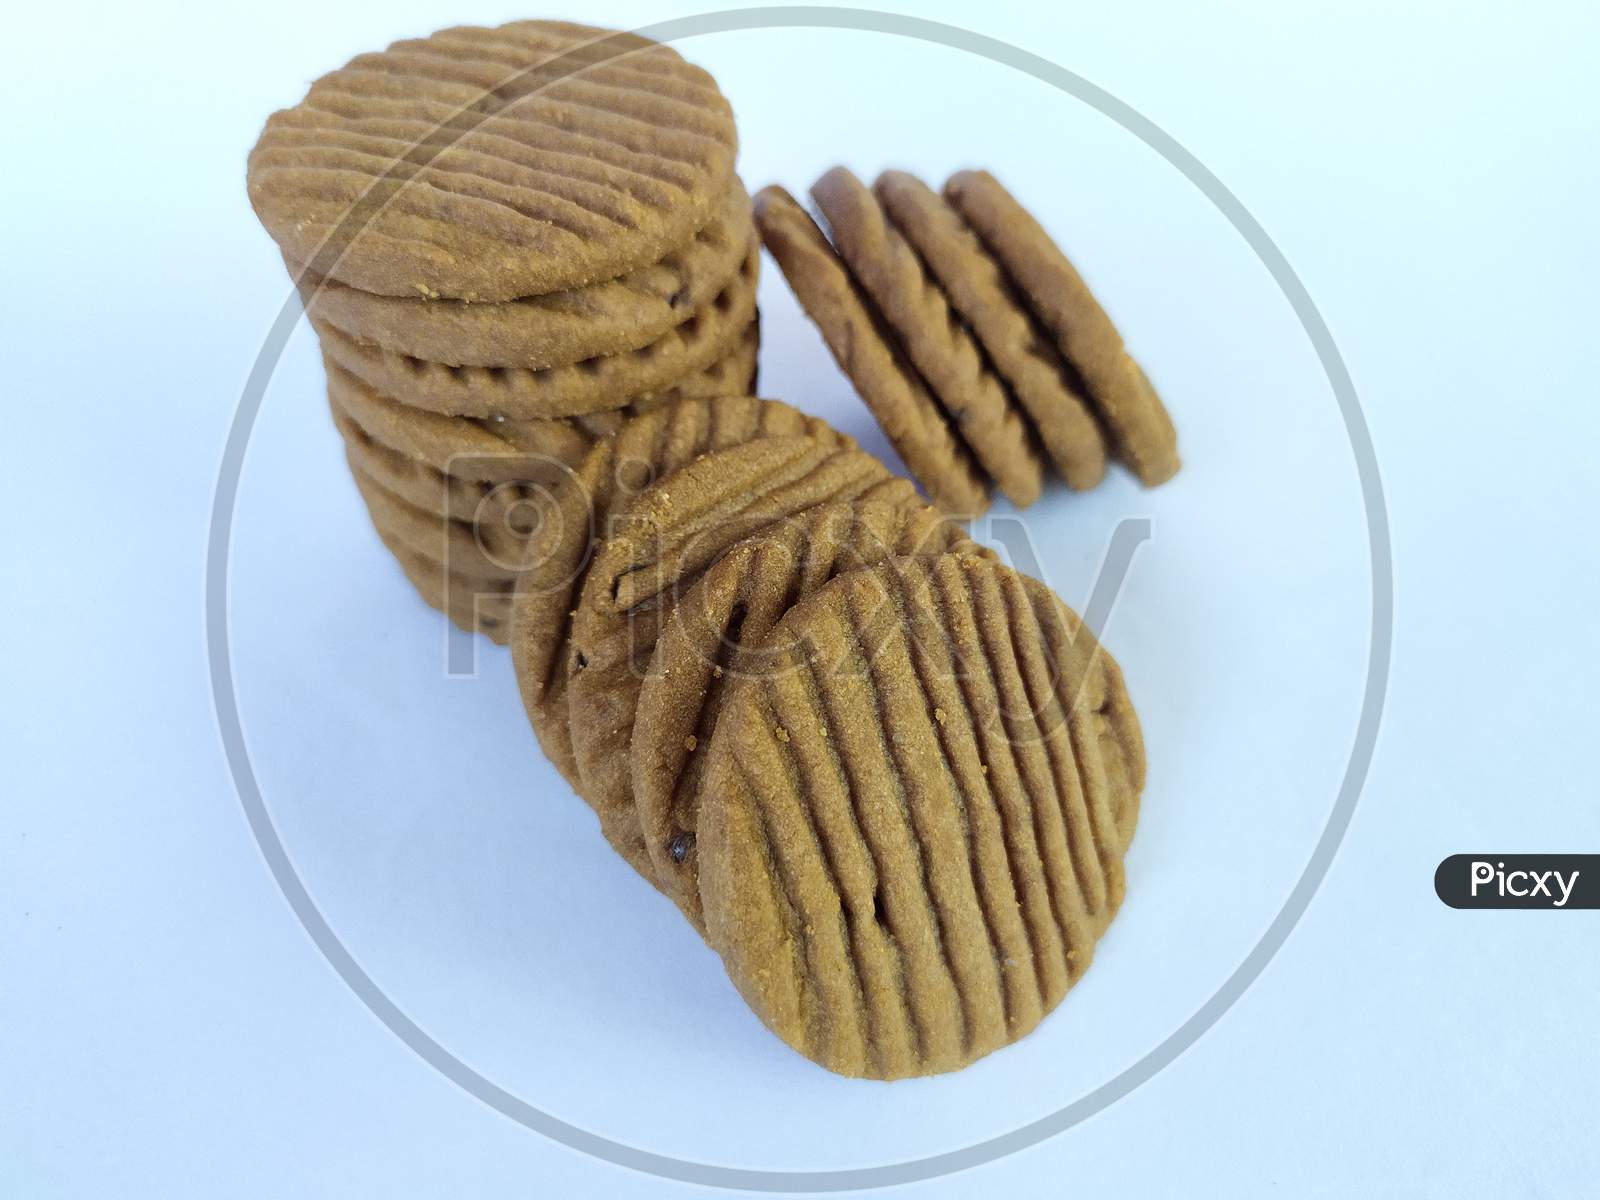 Crispy round biscuits for afternoon tea.